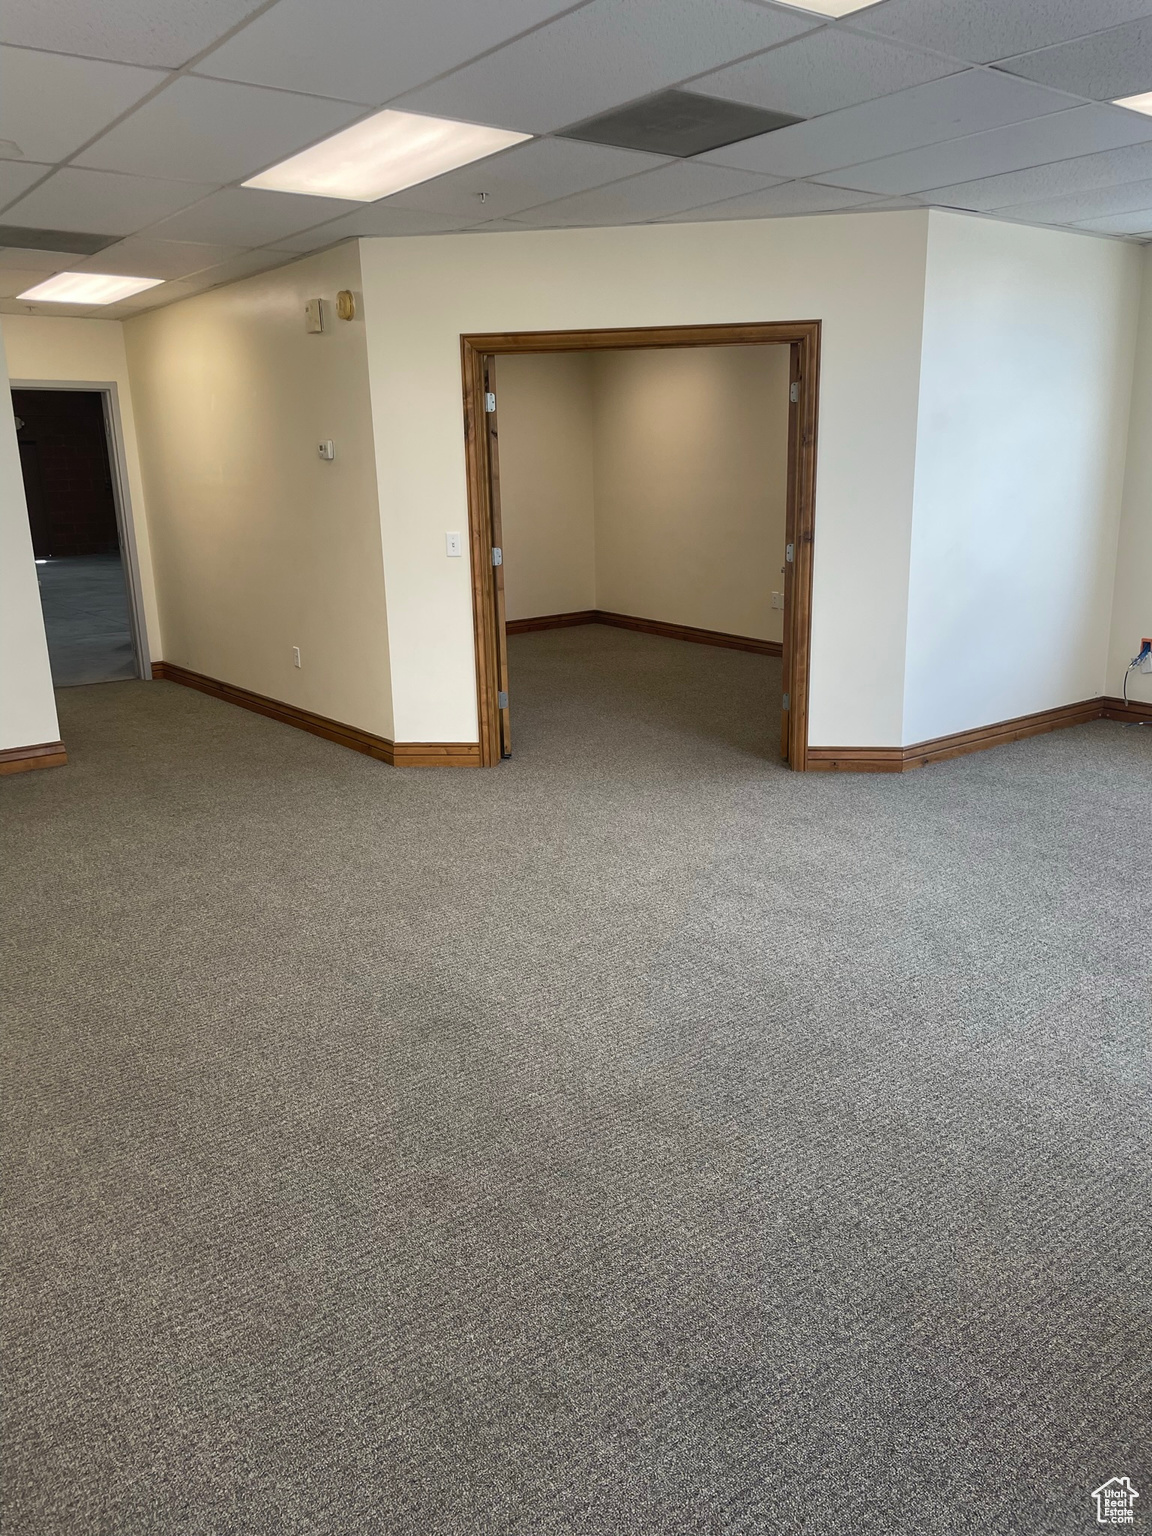 Spare room with light colored carpet and a paneled ceiling